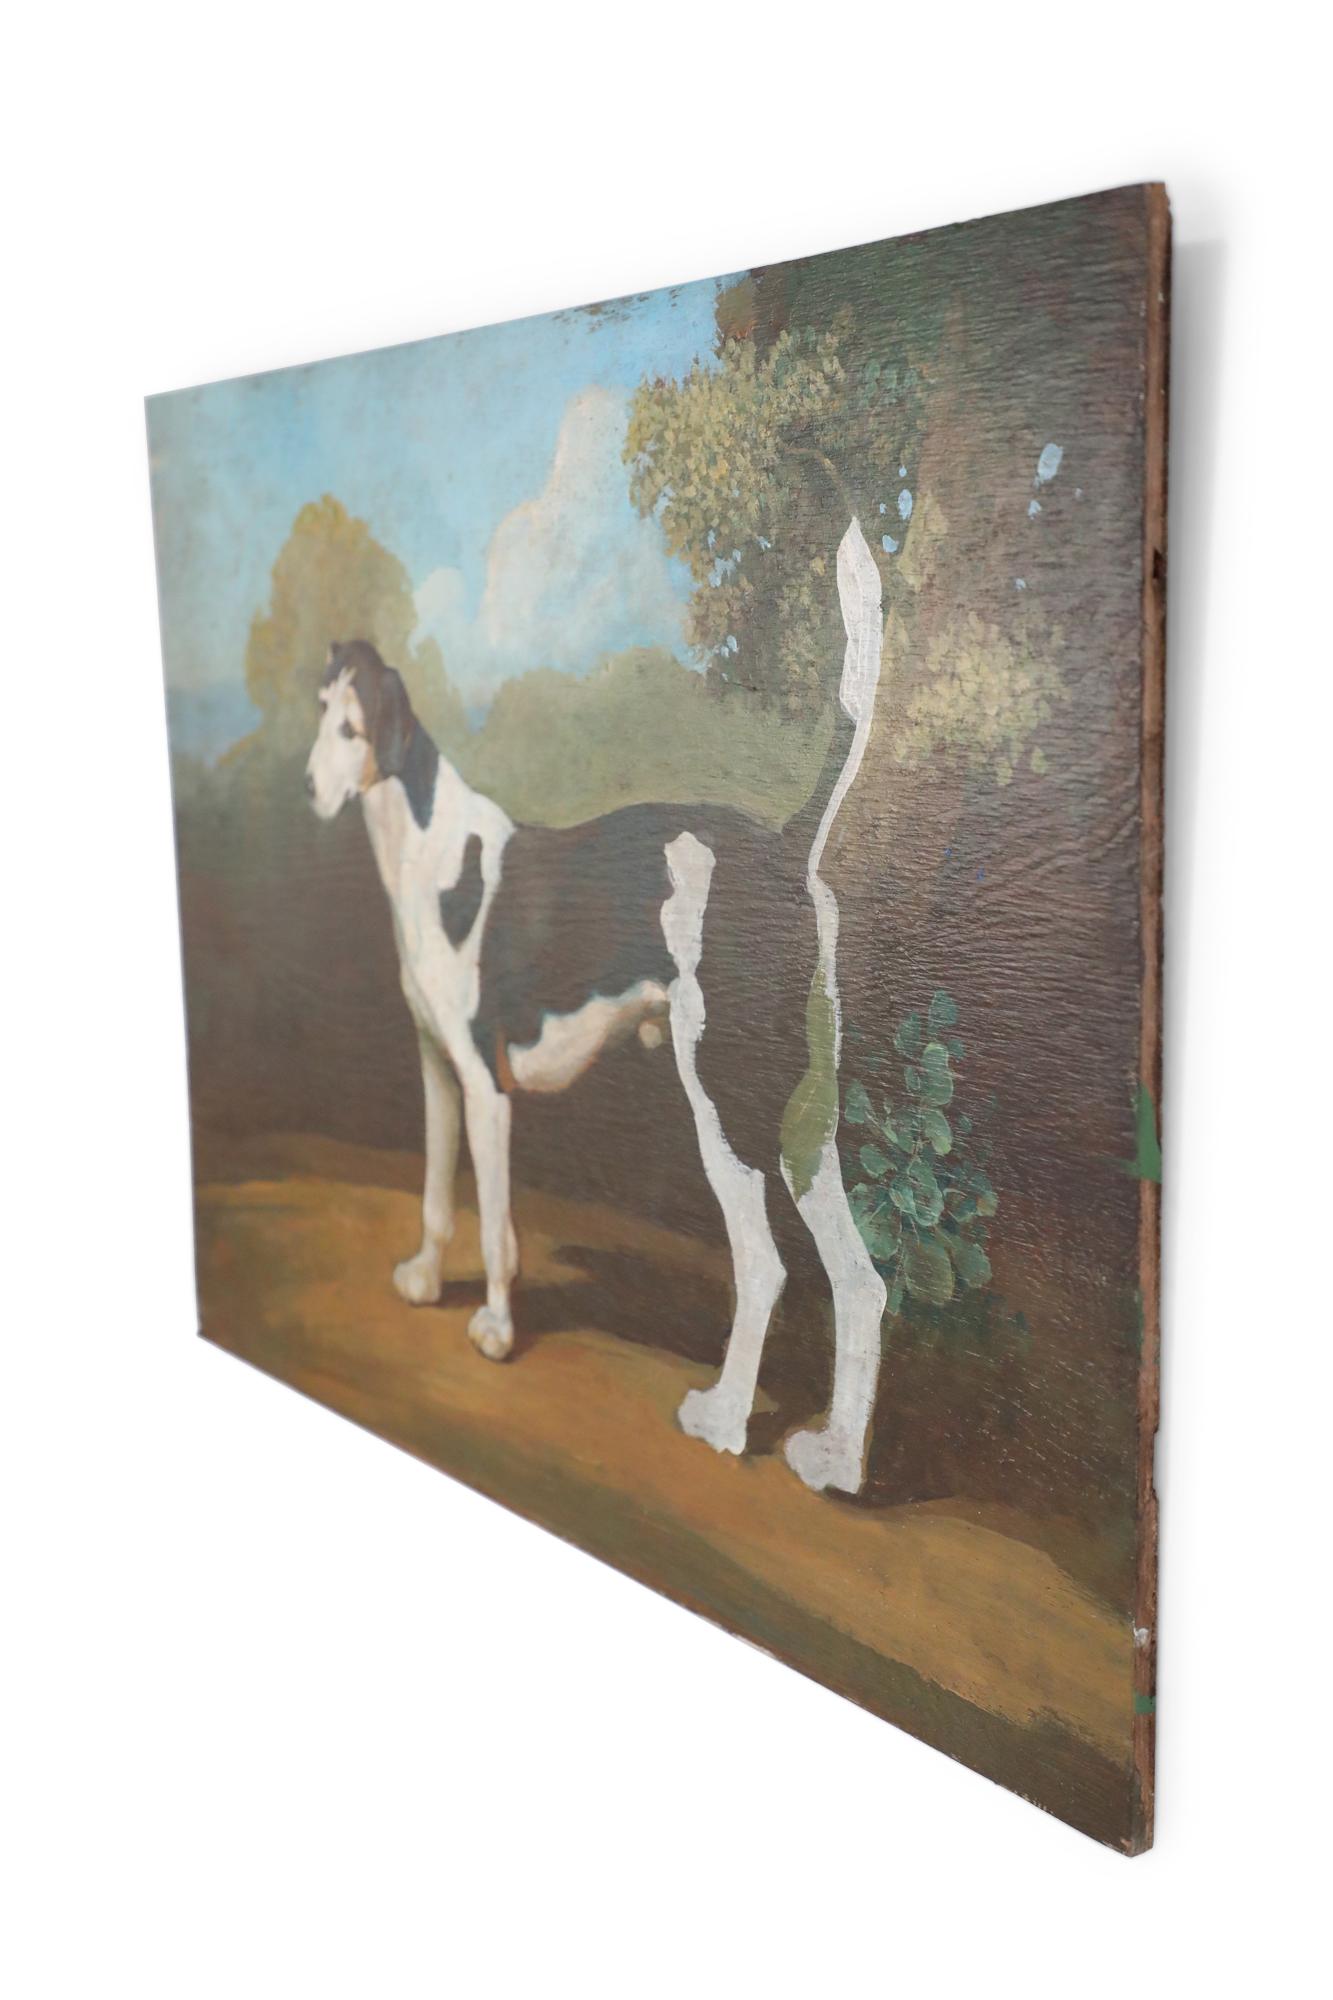 Vintage (20th Century) painting of a black and white dog captured on a swath of earth, against a background of landscape scenery, on rectangular, unframed plywood.
 